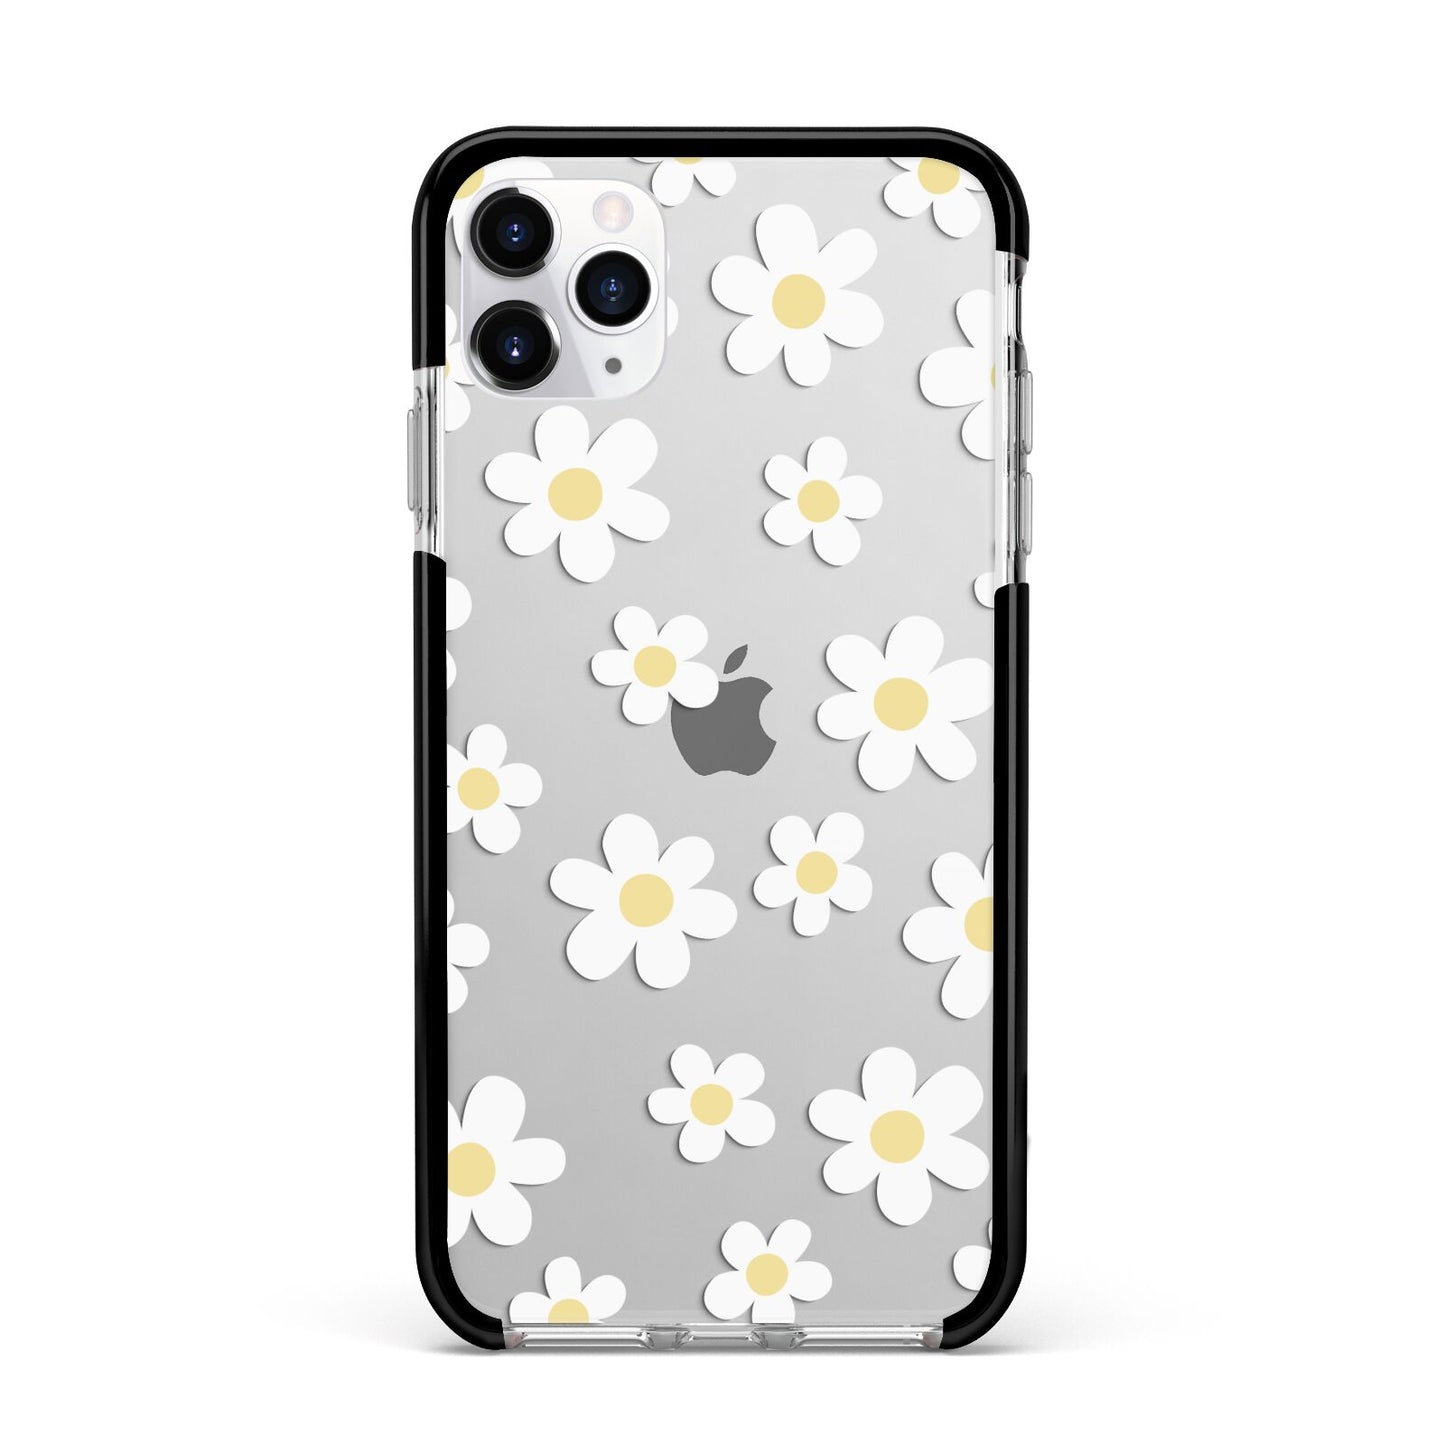 Daisy Apple iPhone 11 Pro Max in Silver with Black Impact Case